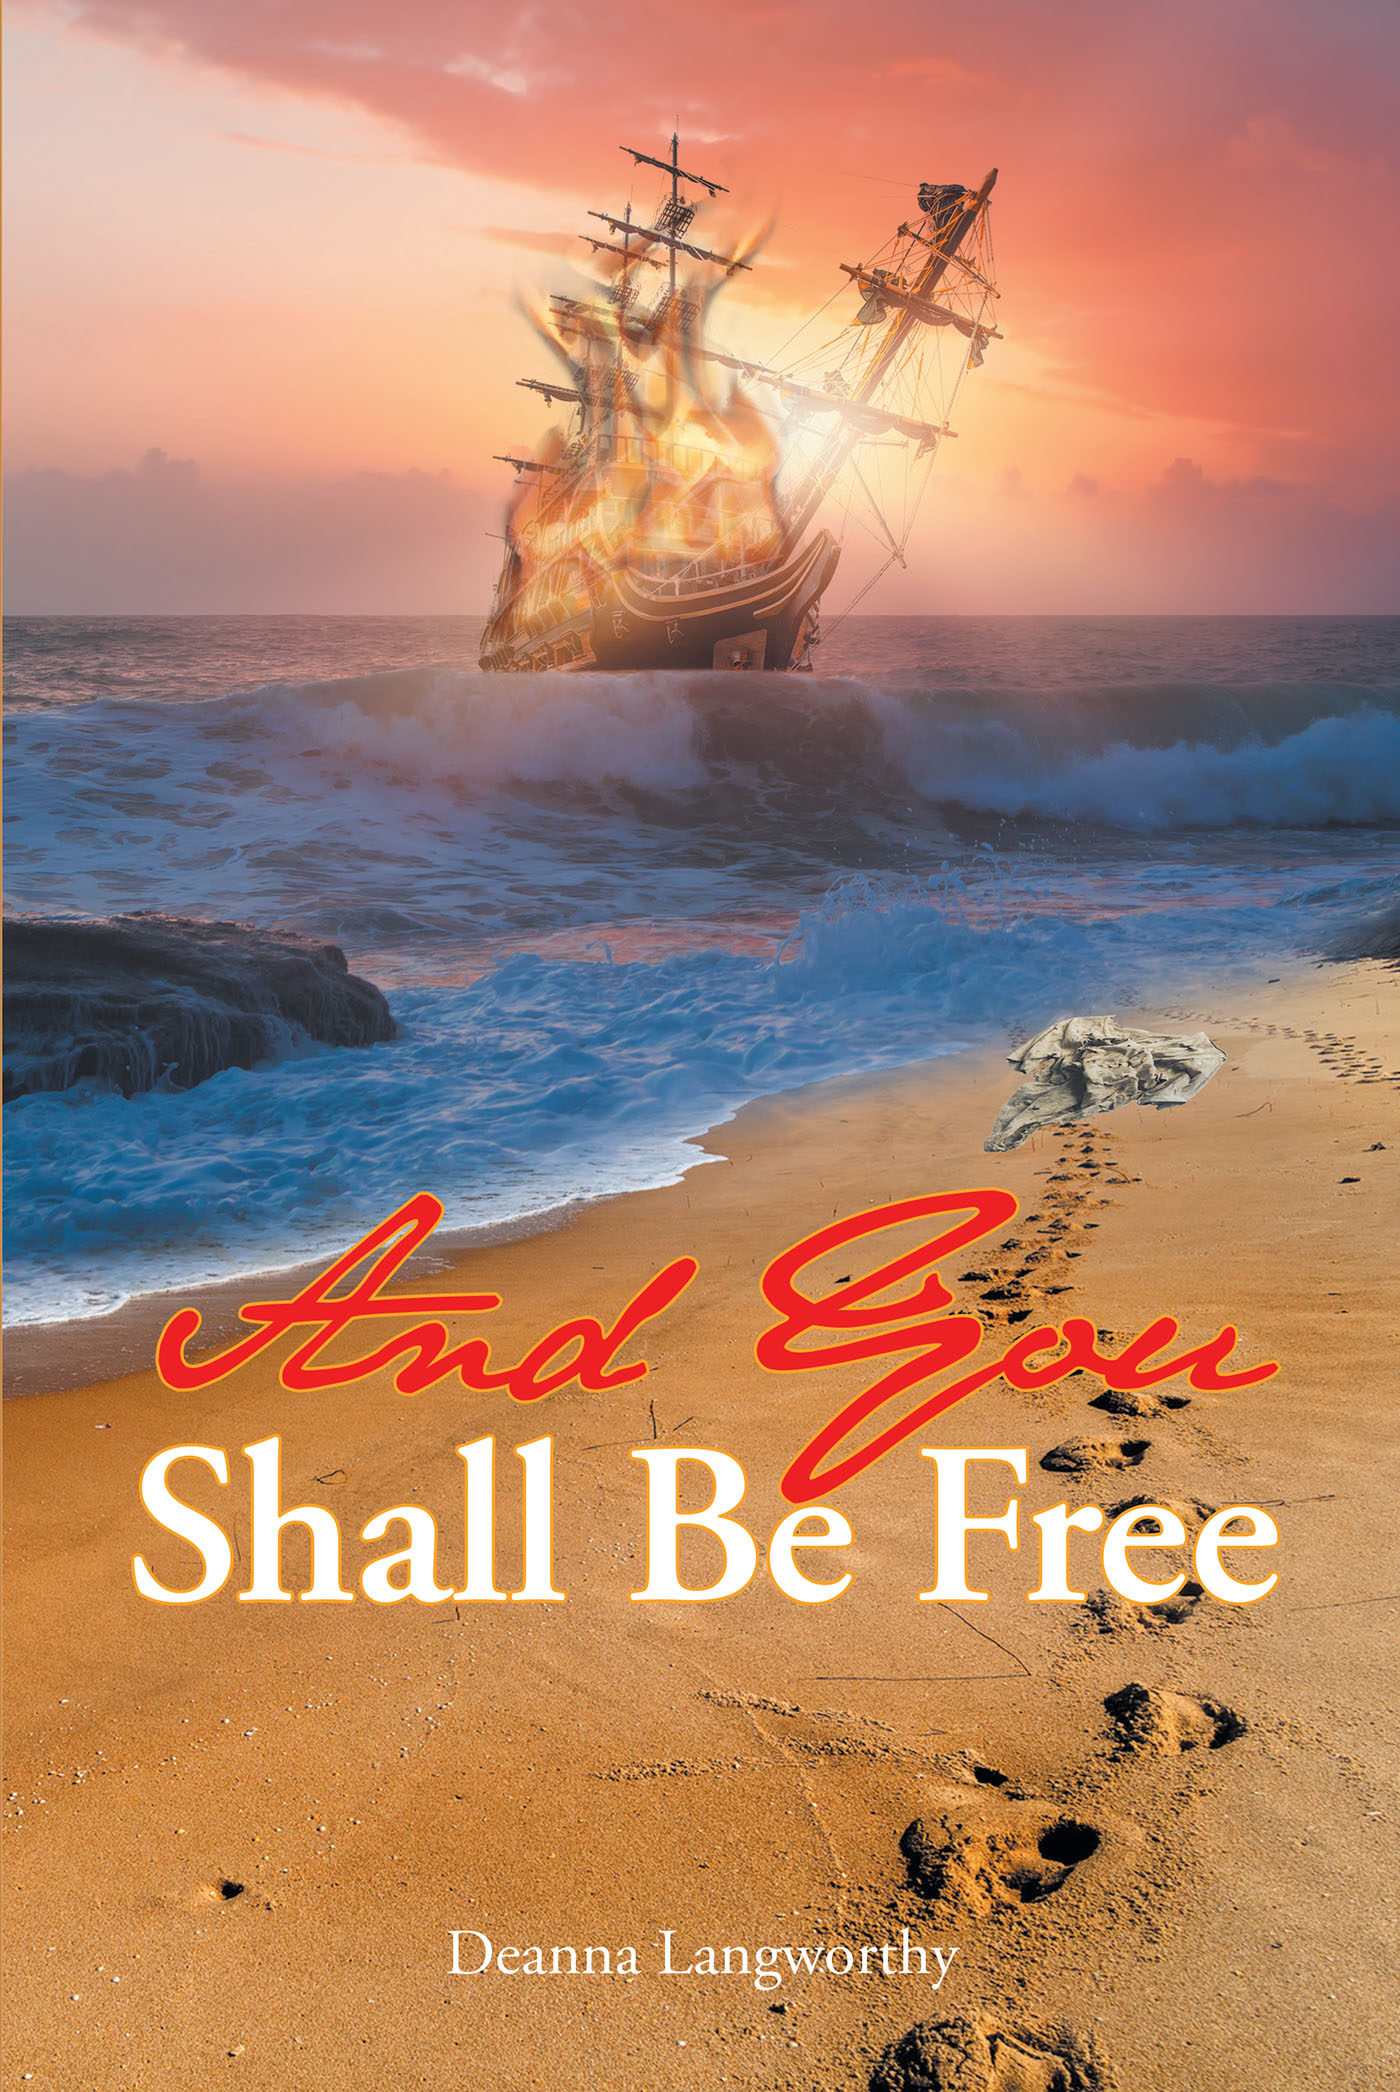 Deanna Langworthy’s Newly Released "And You Shall Be Free" is a Powerful Account of Facing One’s Trauma and Breaking Free of Painful Hurts